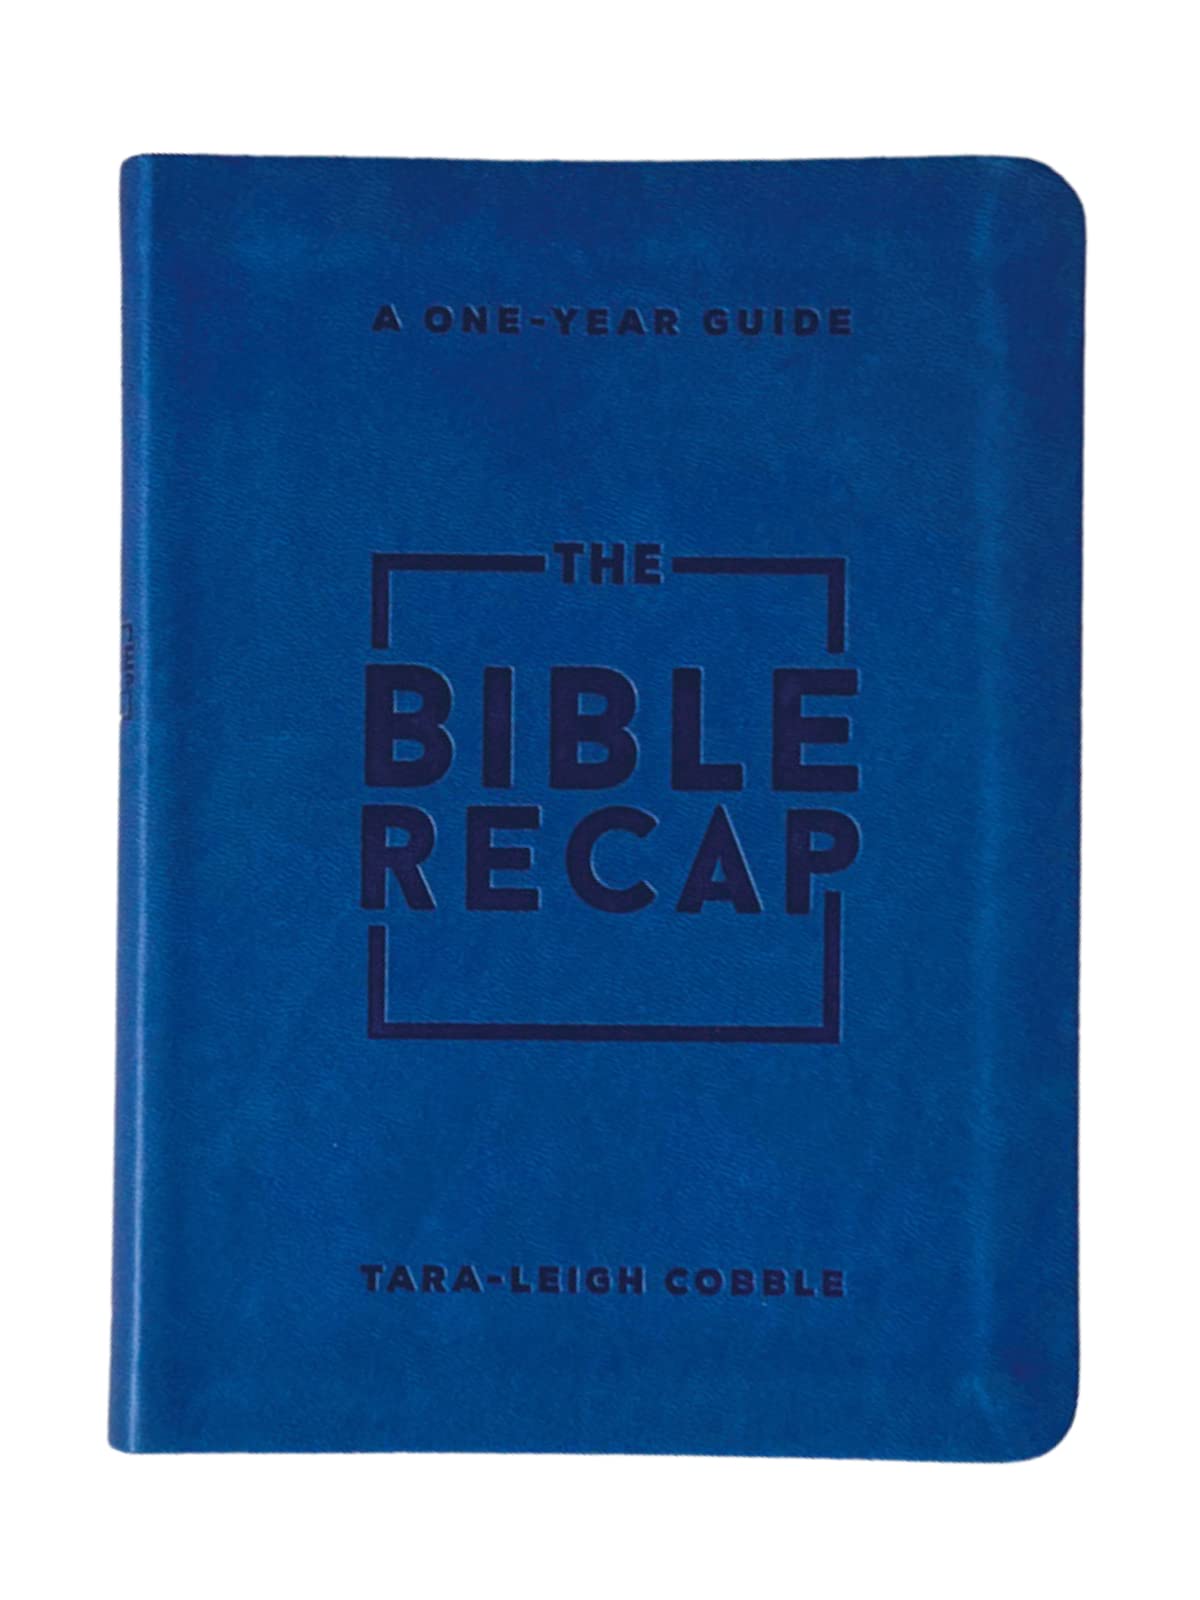 The Bible Recap: A One-Year Guide to Reading and Understanding the Entire Bible, Personal Size Imitation Leather